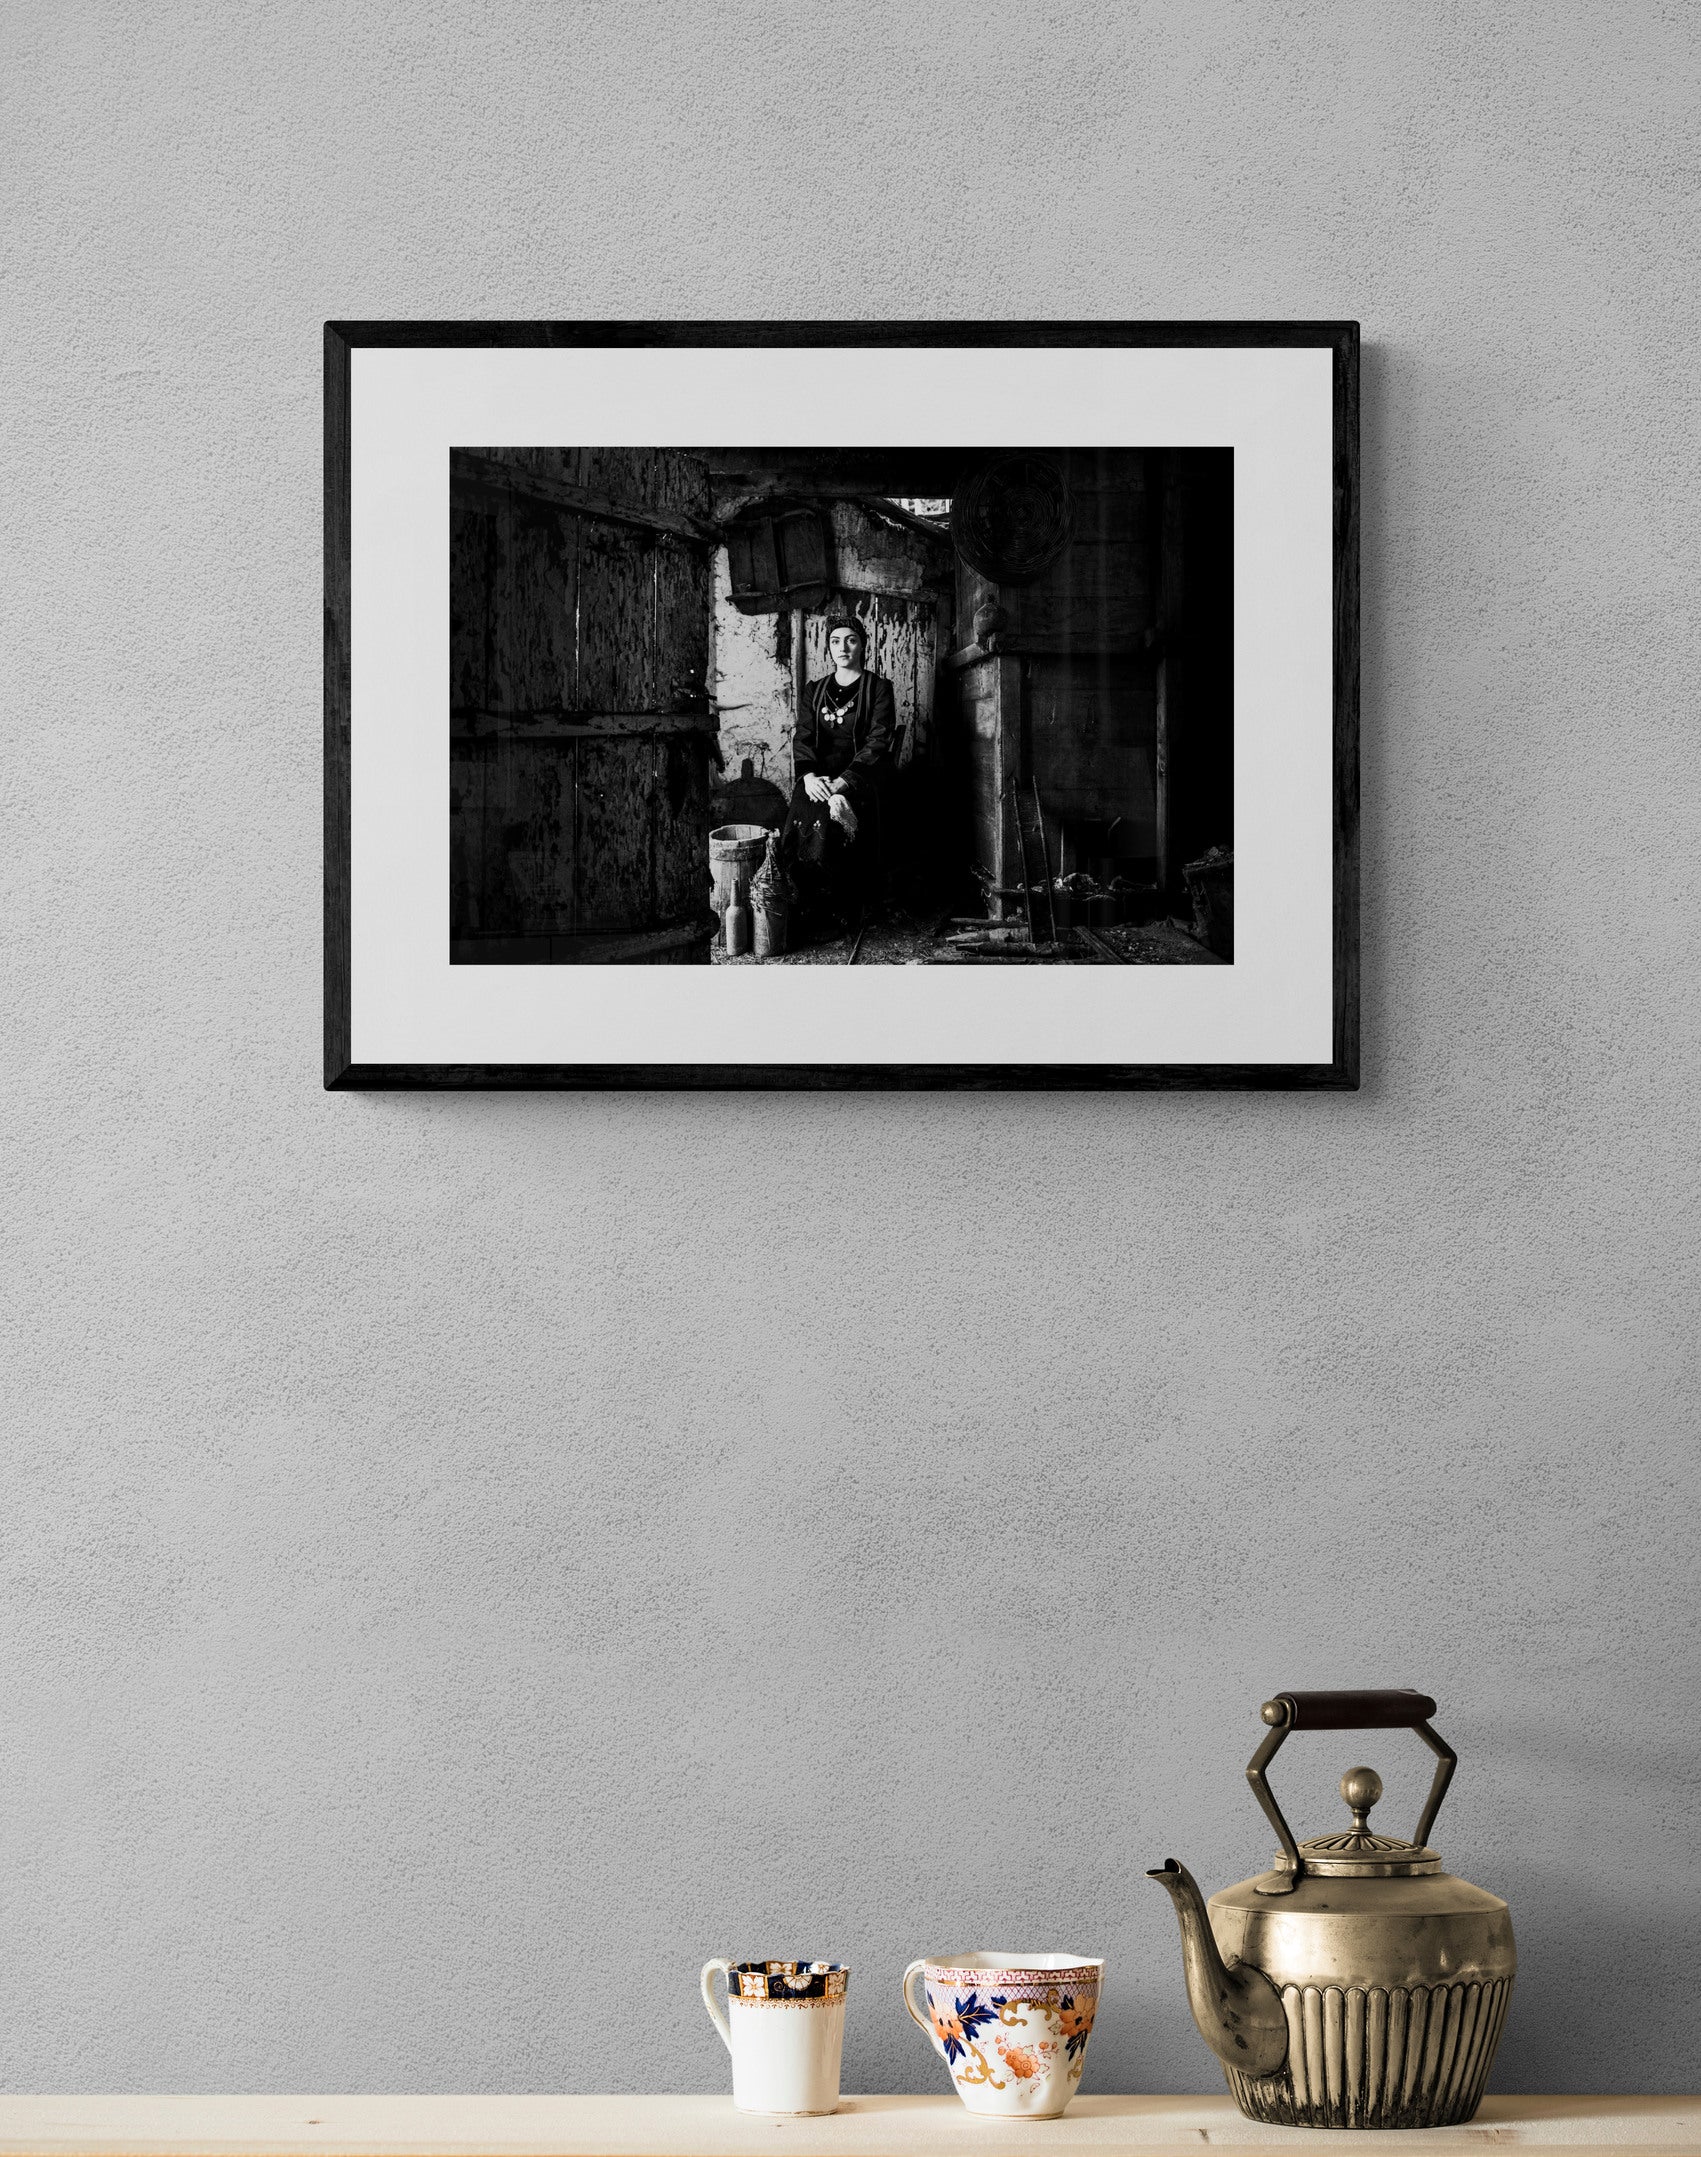 Black and White Photography Wall Art Greece | Rural costume of Kastoria in Lefki village W. Macedonia by George Tatakis - single framed photo